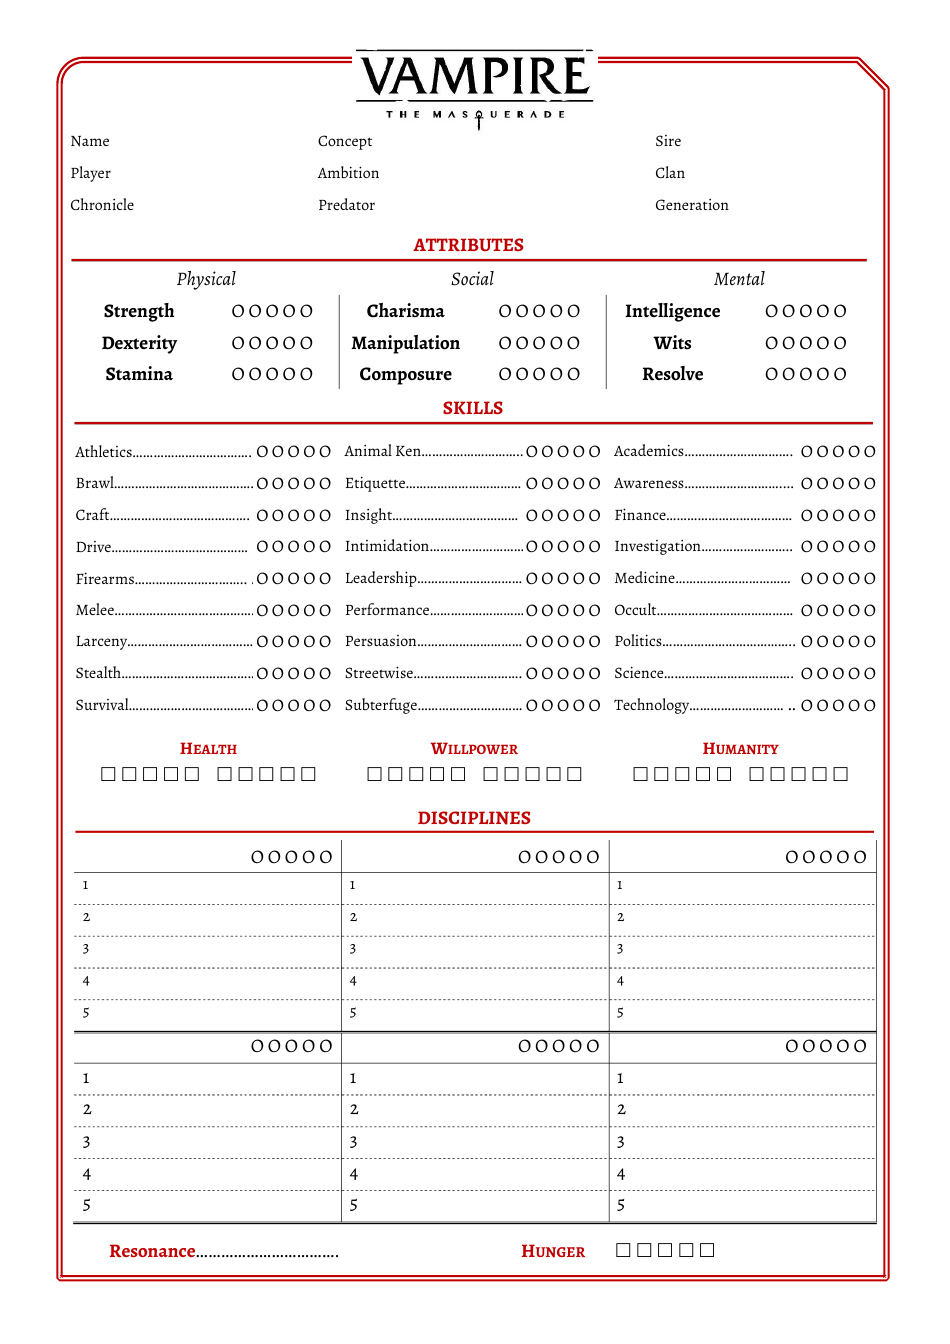 Vampire the Masquerade Simple Character Sheet - A convenient and user-friendly document for tracking your character's stats and abilities in the immersive world of Vampire the Masquerade. Easily manage your character's traits and progress in this tabletop role-playing game.